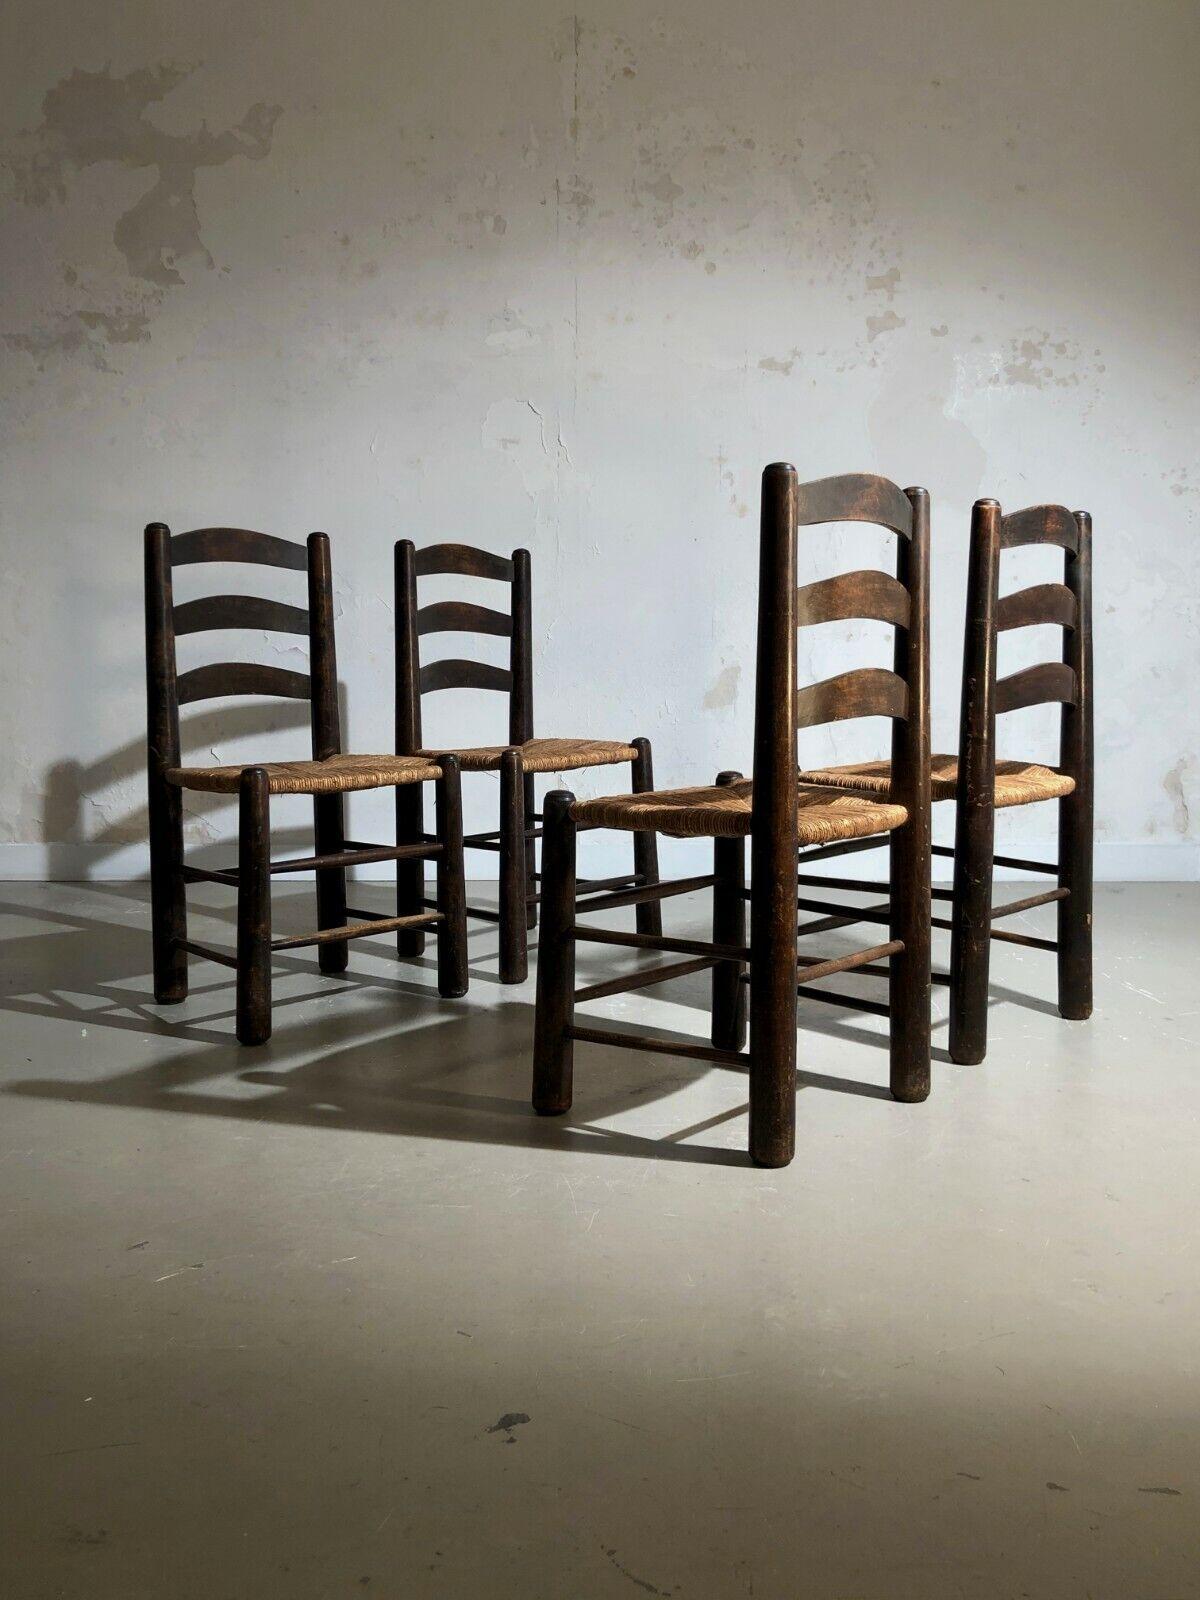 Brutalist A Set of 4 BRUTALIST RUSTIC MODERN CHAIRS by GEORGES ROBERT, France 1960 For Sale